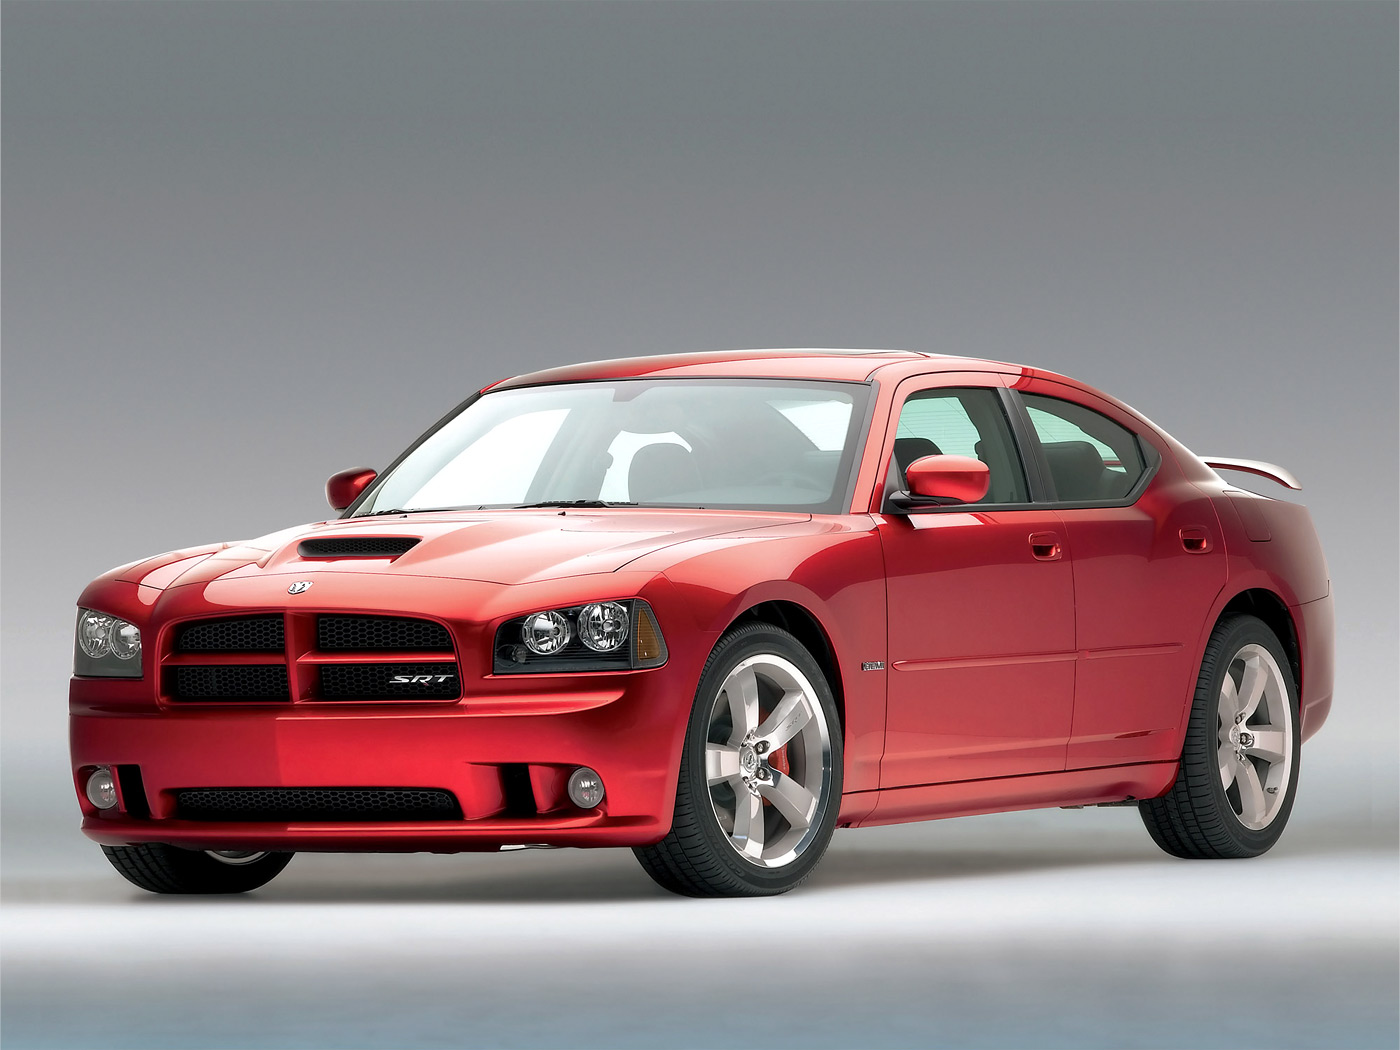 Dodge Charger Srt8 Wallpaper HD In Cars Imageci